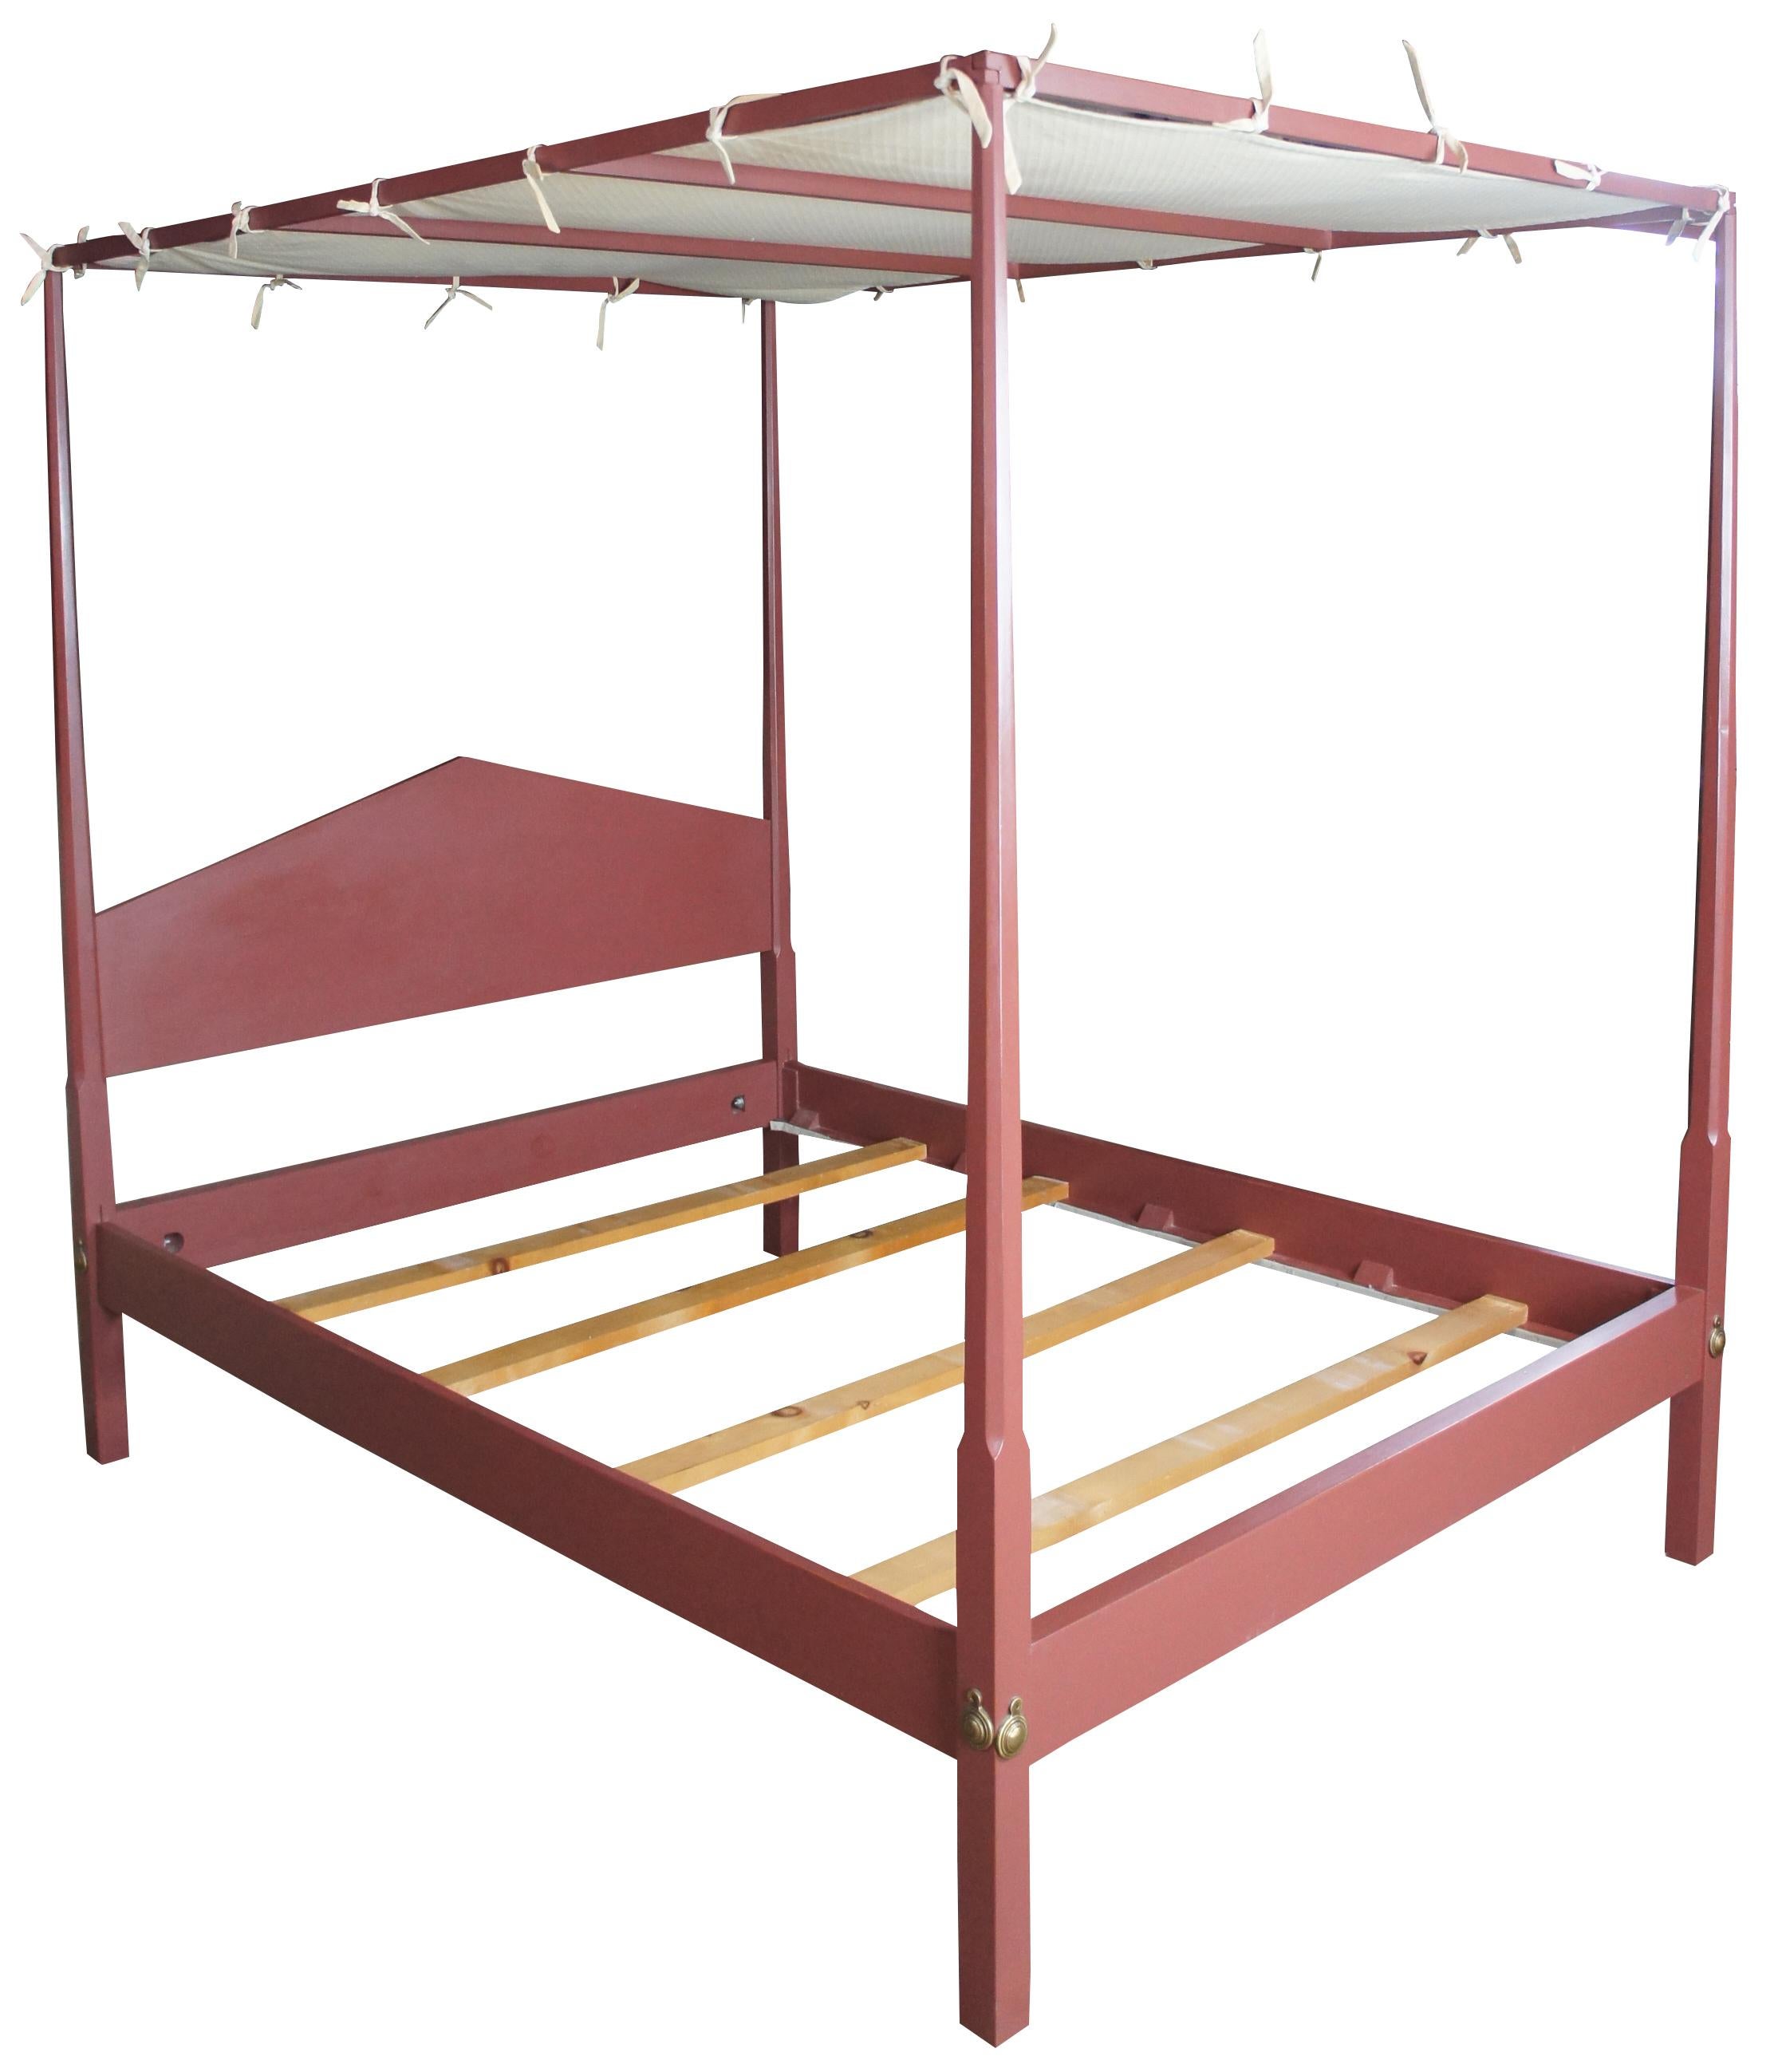 Early American painted queen size pencil post canopy bed by David T Smith, circa 1987. A style popularized in the late 1700s. Features a canopy with fabric, pencil posts and colonial hardware. Finished in Old Red.
   